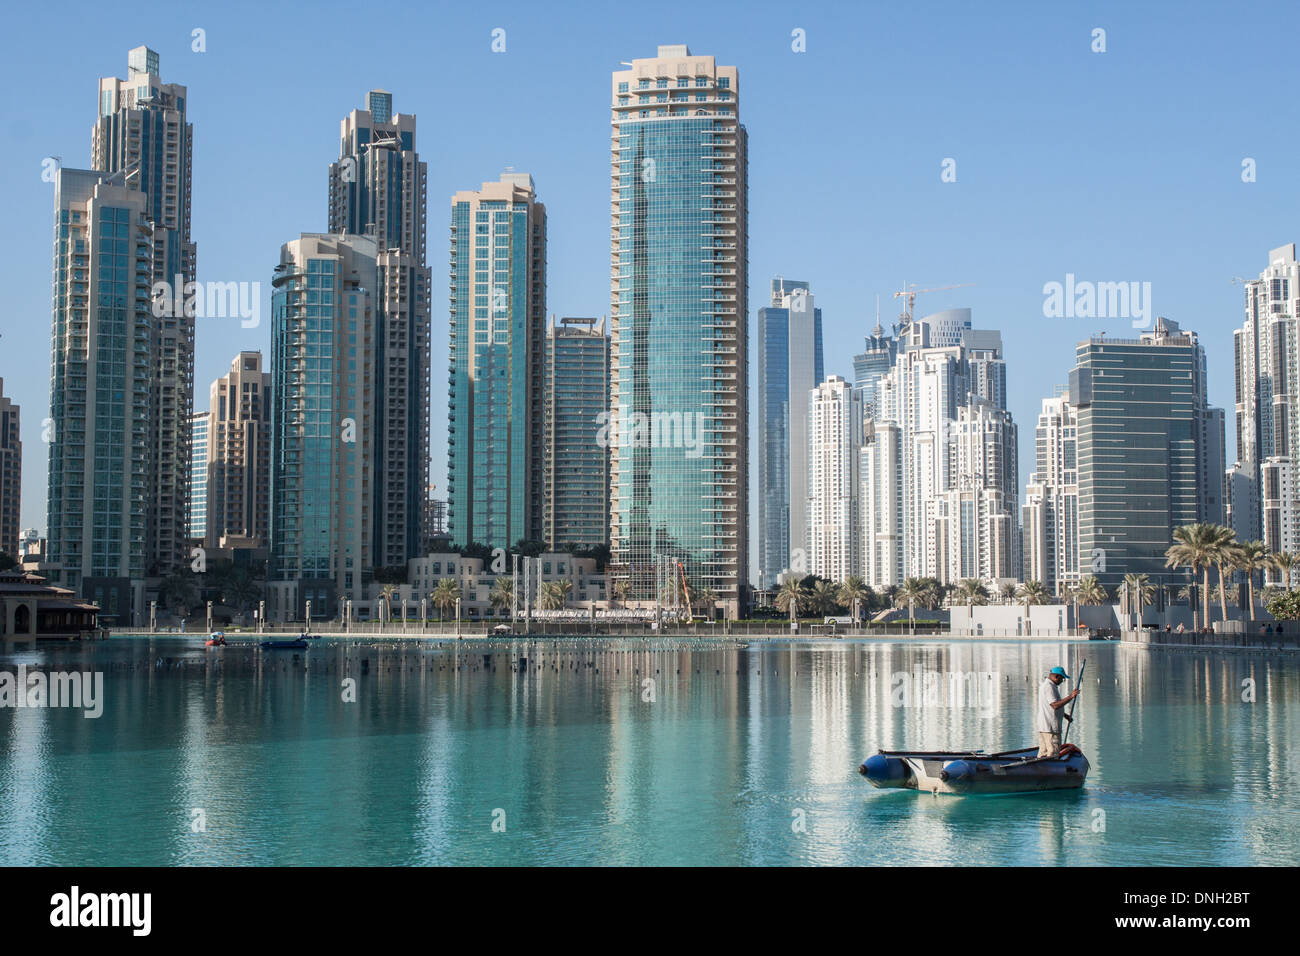 WORKERS CLEANING THE POND NEXT TO THE DUBAI MALL IN THE SHADE OF THE HIGHRISES OF THE BUSINESS BAY NEIGHBORHOOD, DOWNTOWN DUBAI, DUBAI, UNITED ARAB EMIRATES, MIDDLE EAST Stock Photo